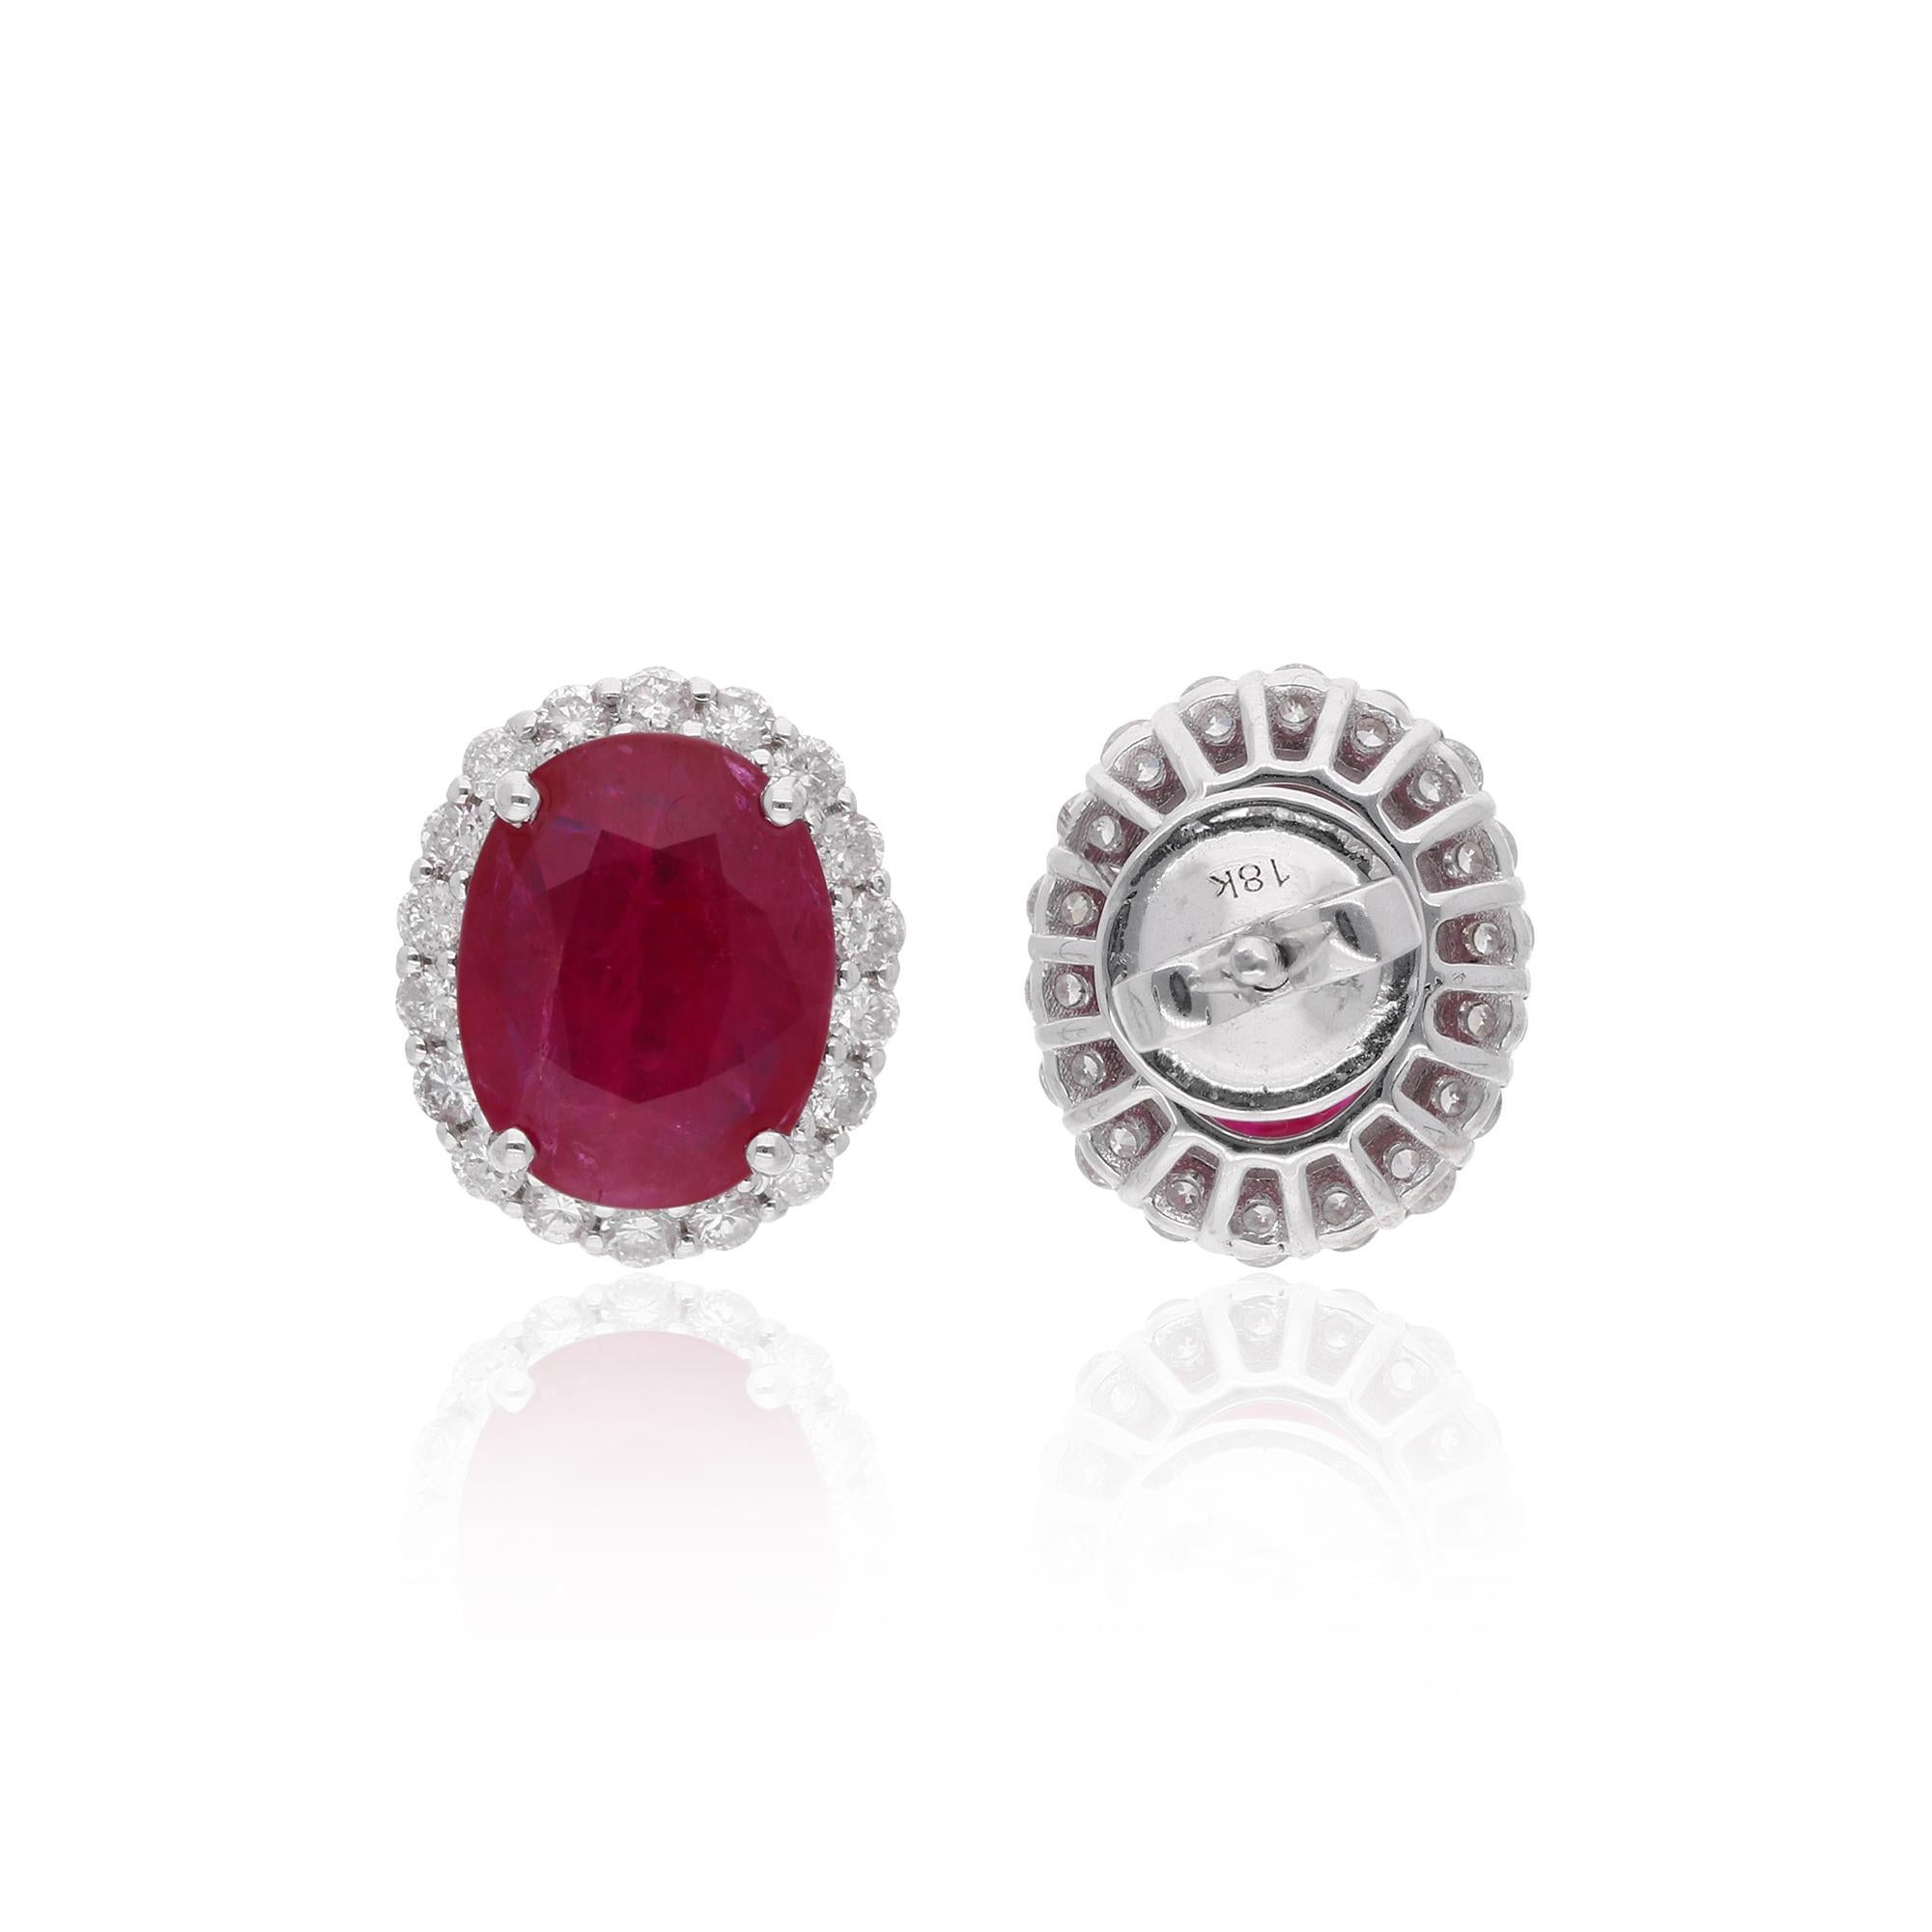 These gorgeous Diamond & Ruby Stud Earrings are the perfect blend of classic and contemporary styles. Crafted from 18k solid white gold, each earring features a stunning Ruby encircled by a halo of brilliant, sparkling diamonds. These earrings are